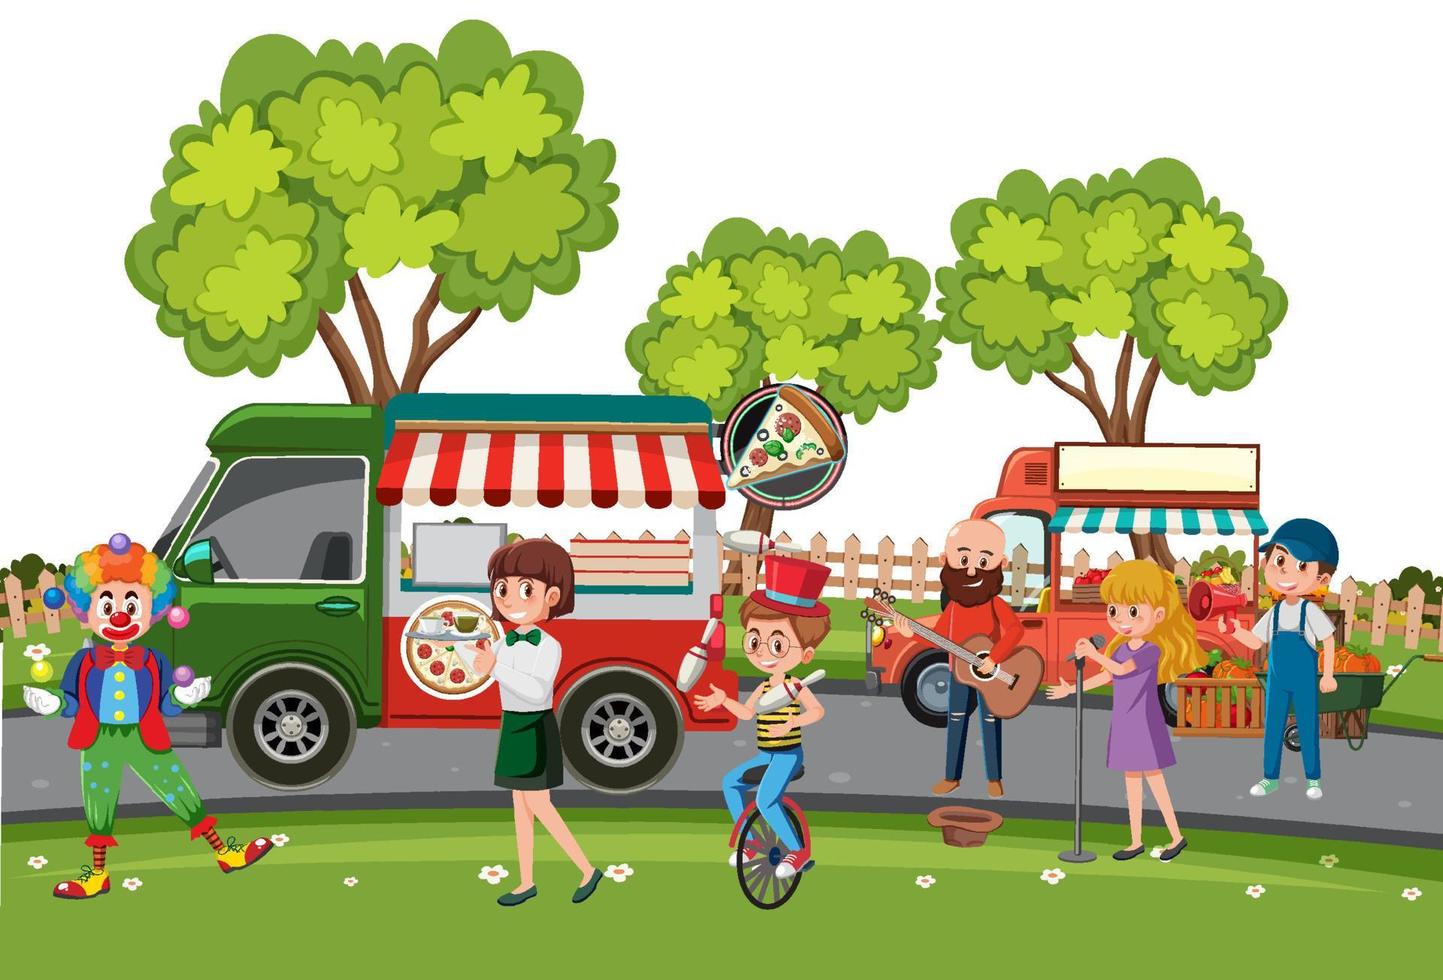 People shopping at the flea market scene vector